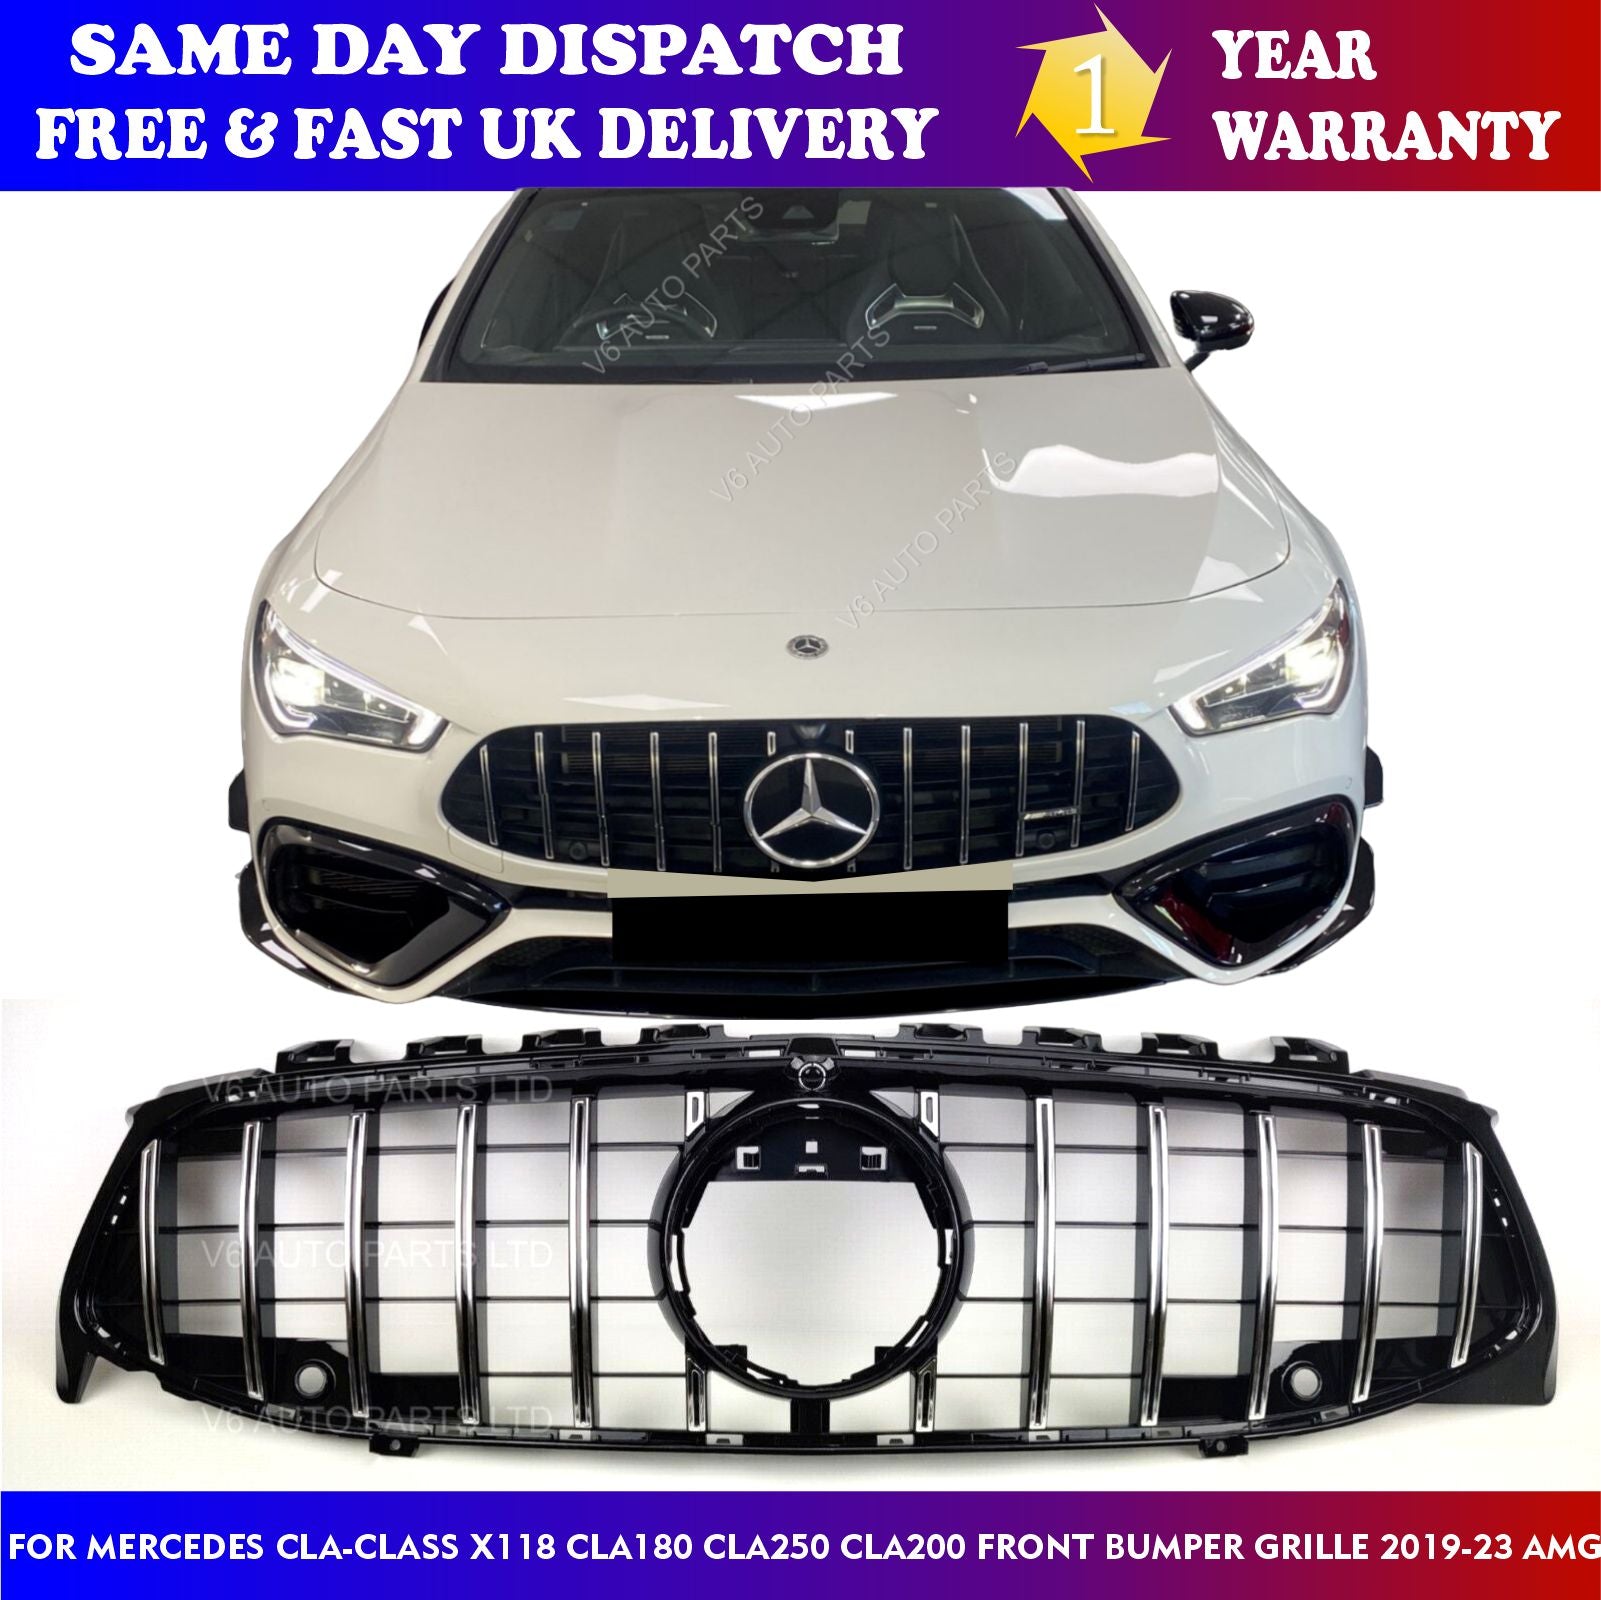 For Mercedes CLA-Class X118 CLA200d Front Radiator GT Grille 2019-2023 Facelift